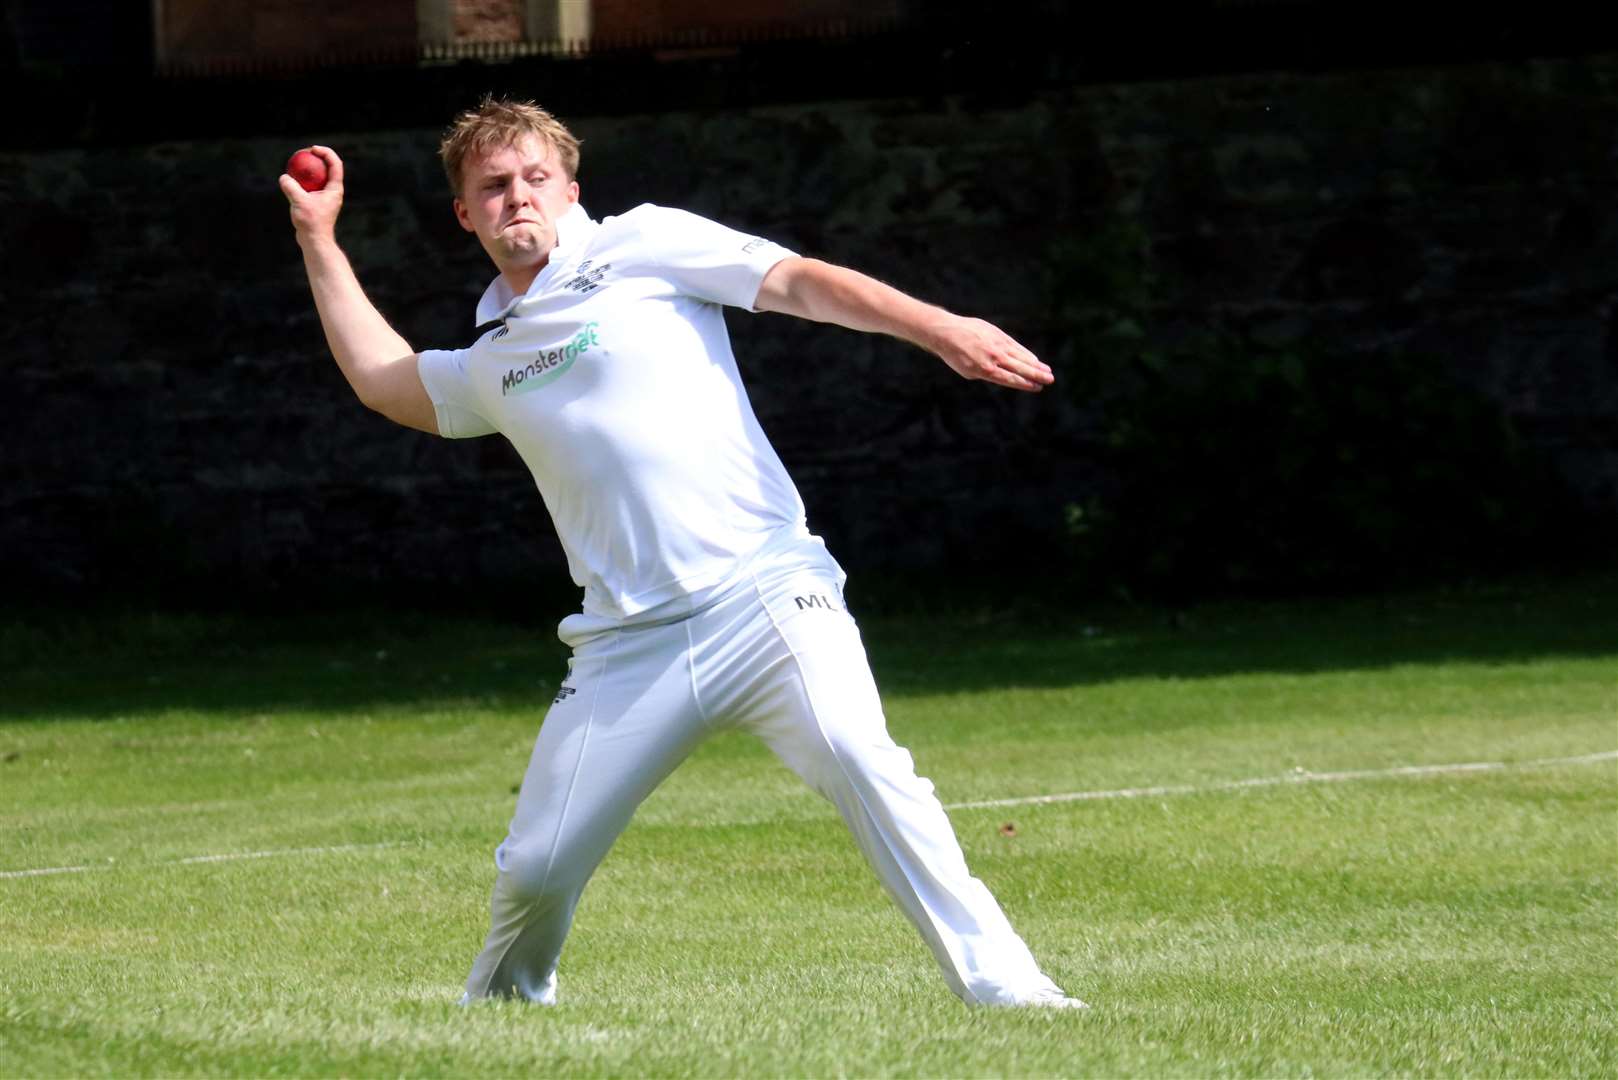 Northern Counties vice-captain Matty Latimer in action. Picture: James Mackenzie